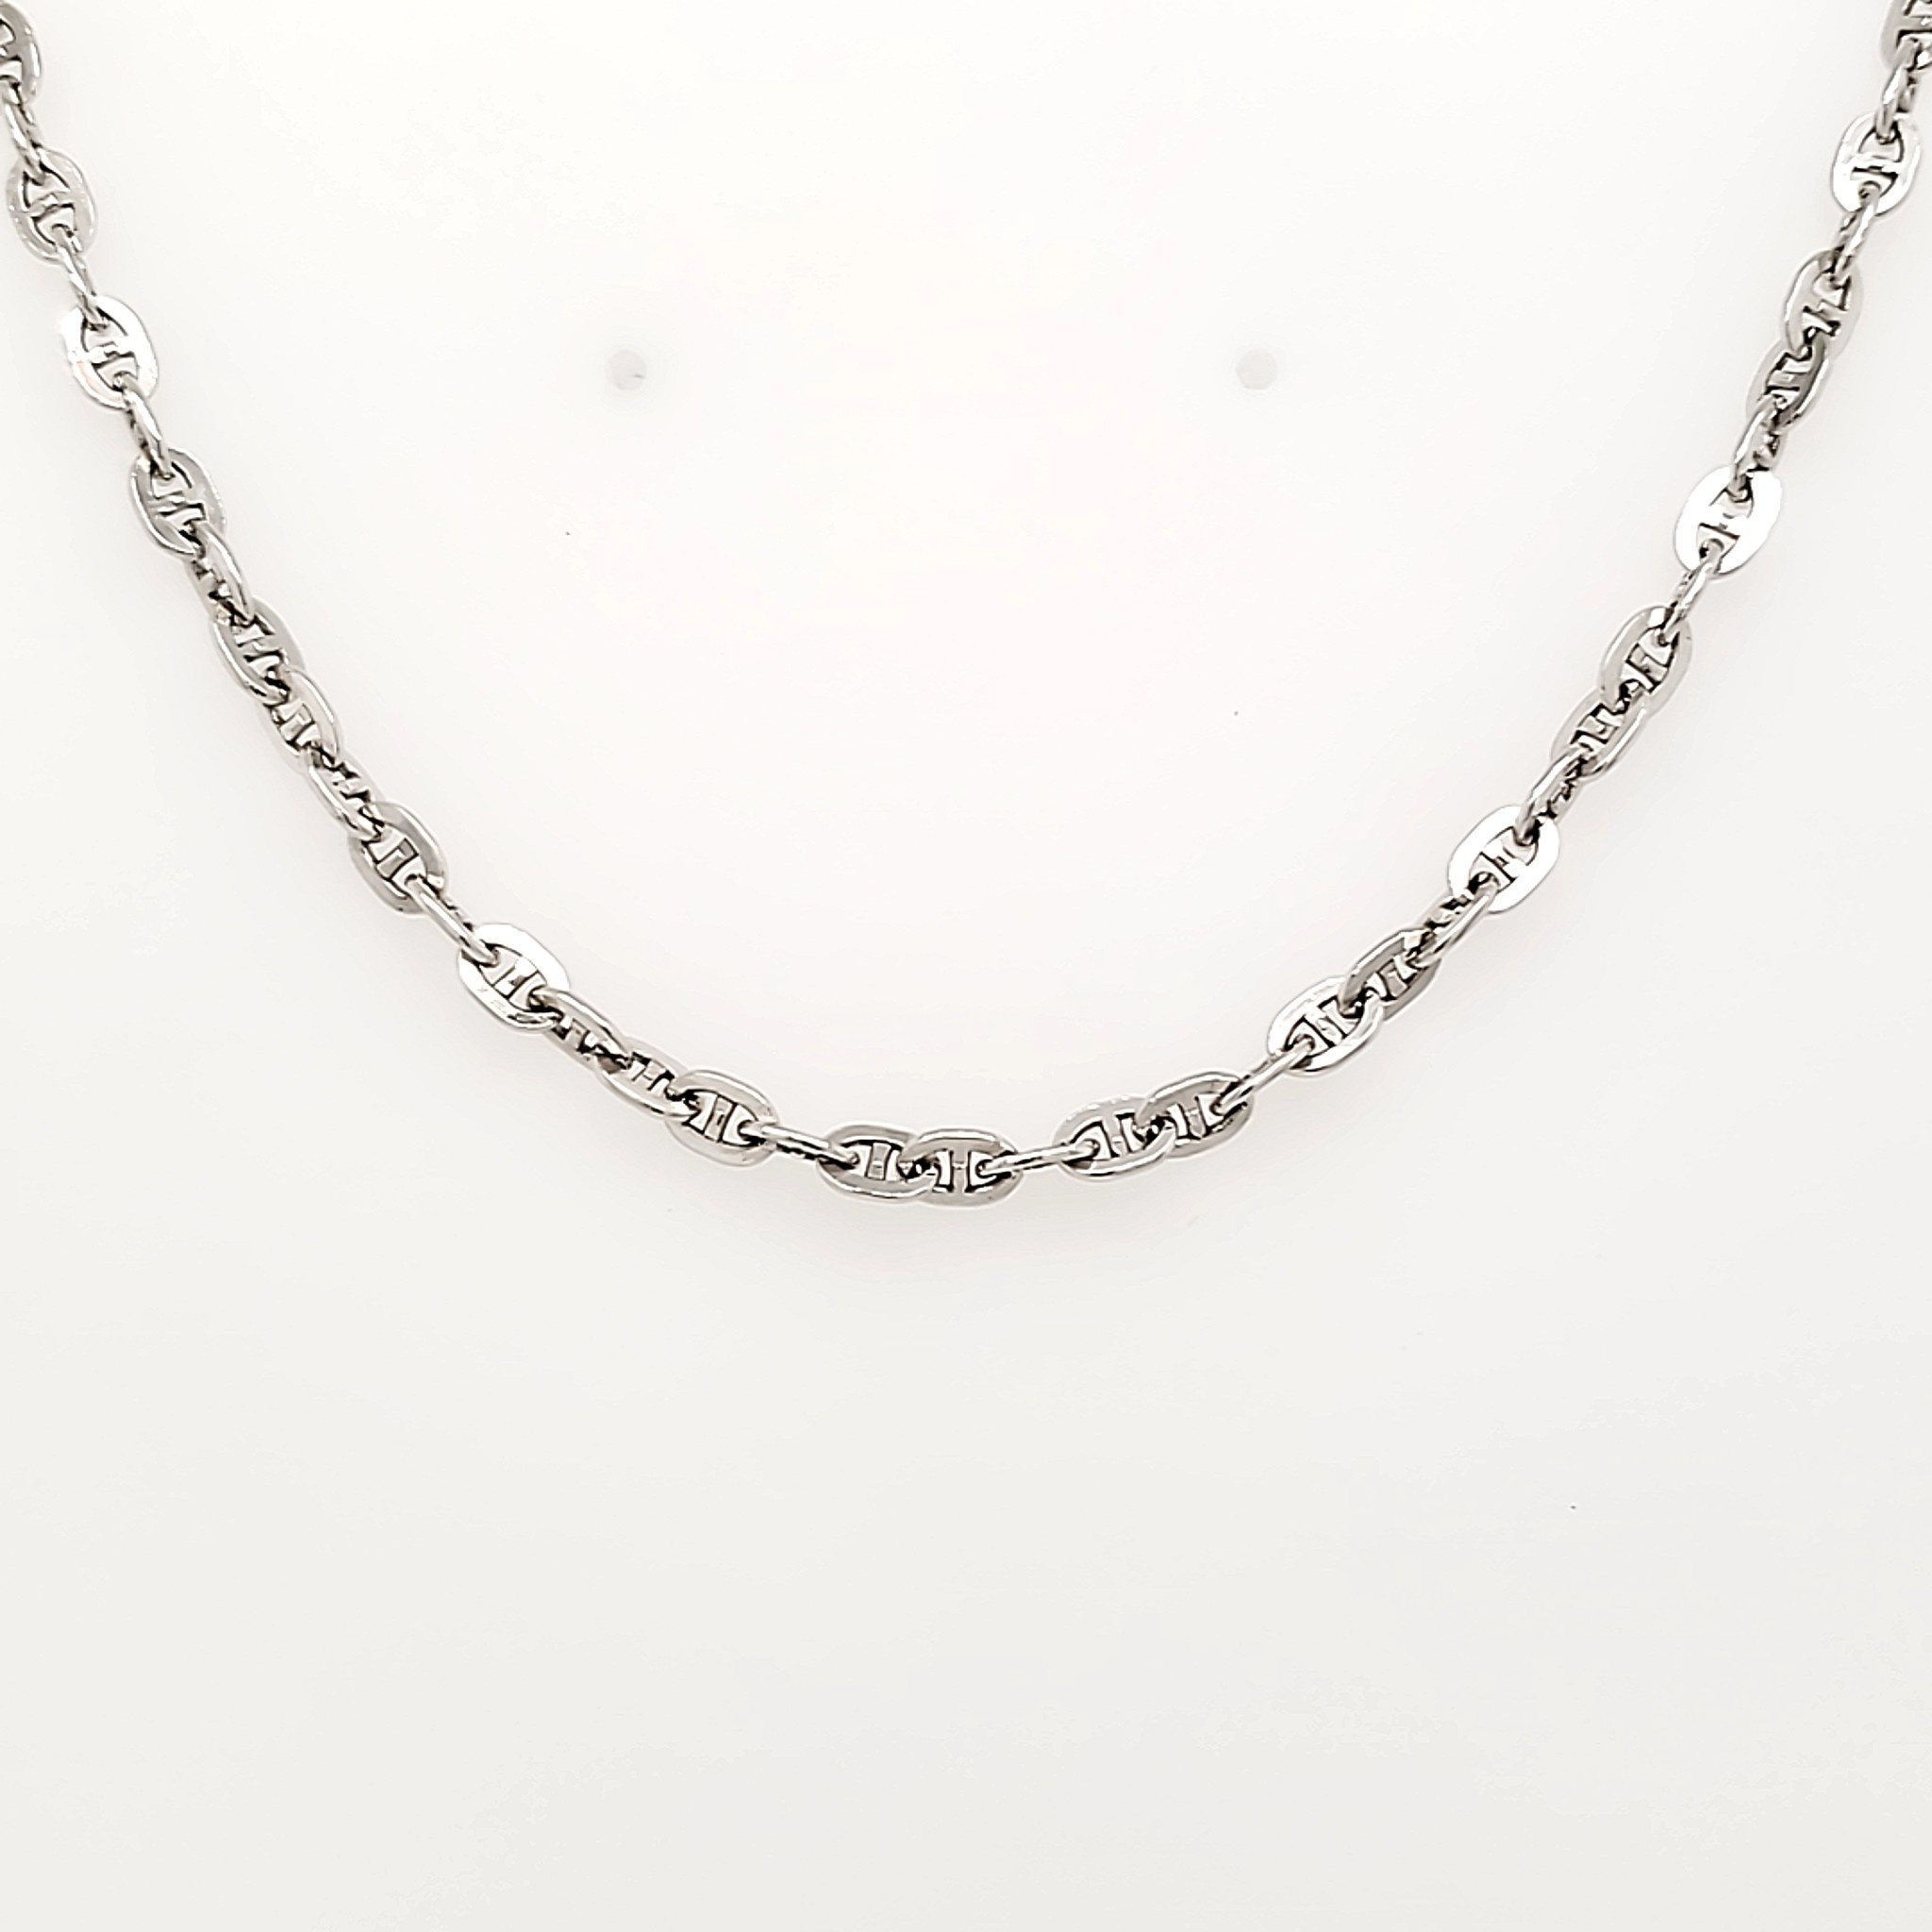 50184 14K WHITE GOLD 22" 3.25MM CABLE  GUCCI STYLE CHAIN